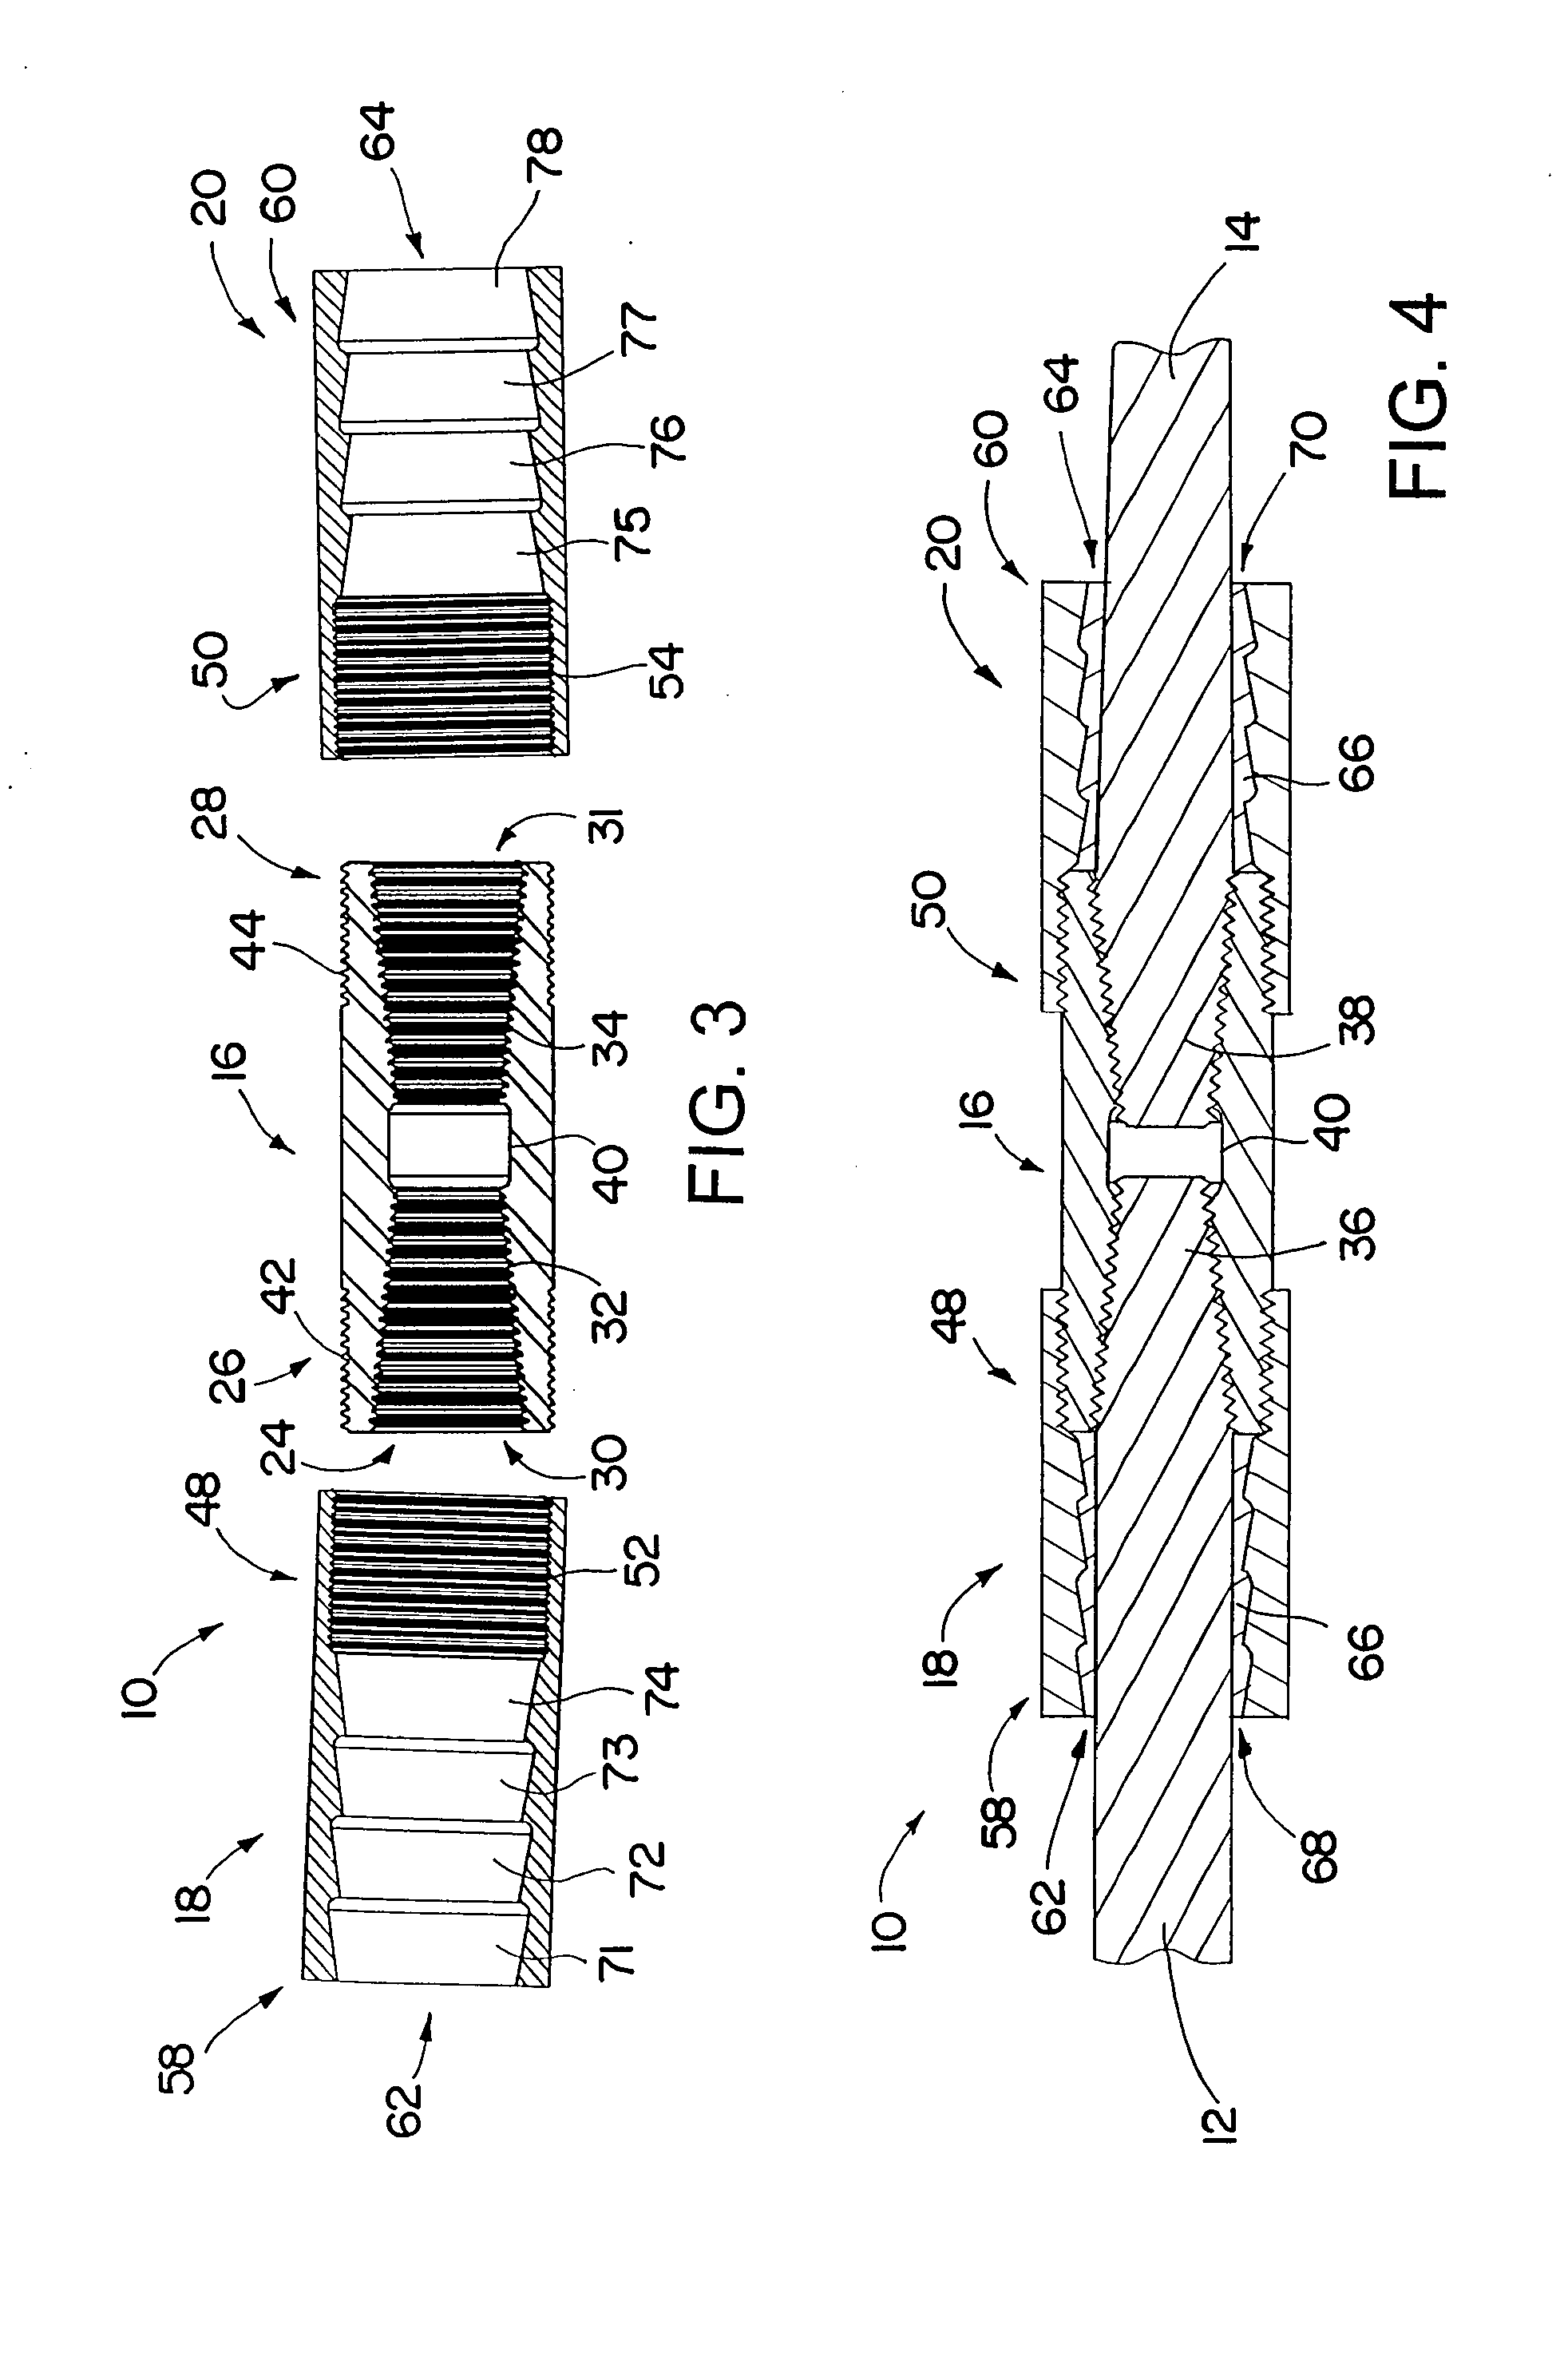 Reinforcing bar splice with threaded collars